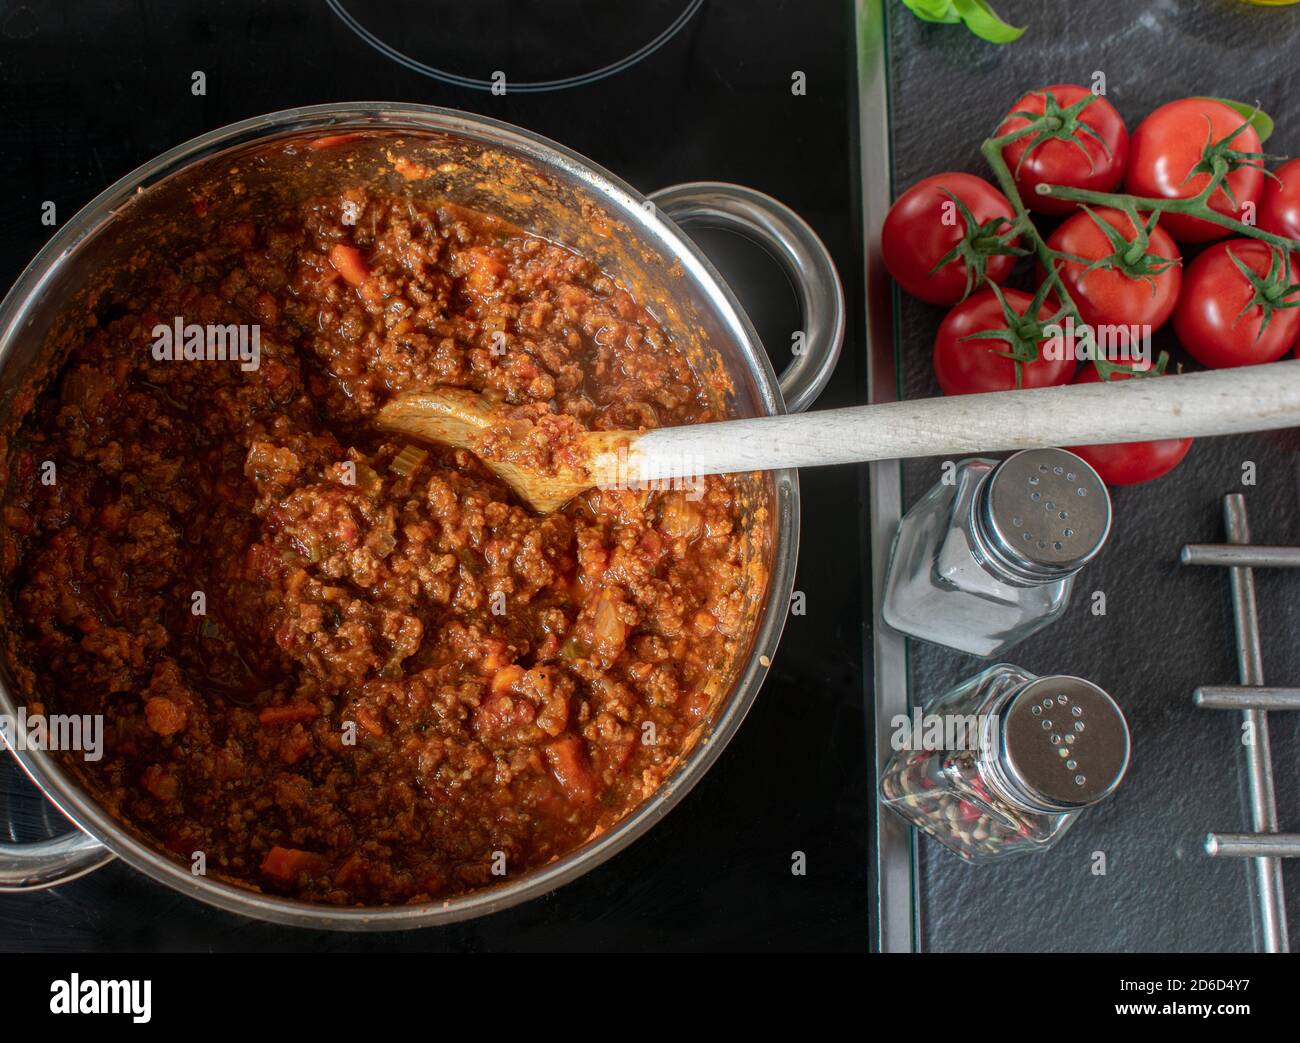 Bolognese Sauce on the hob / stove from above Stock Photo